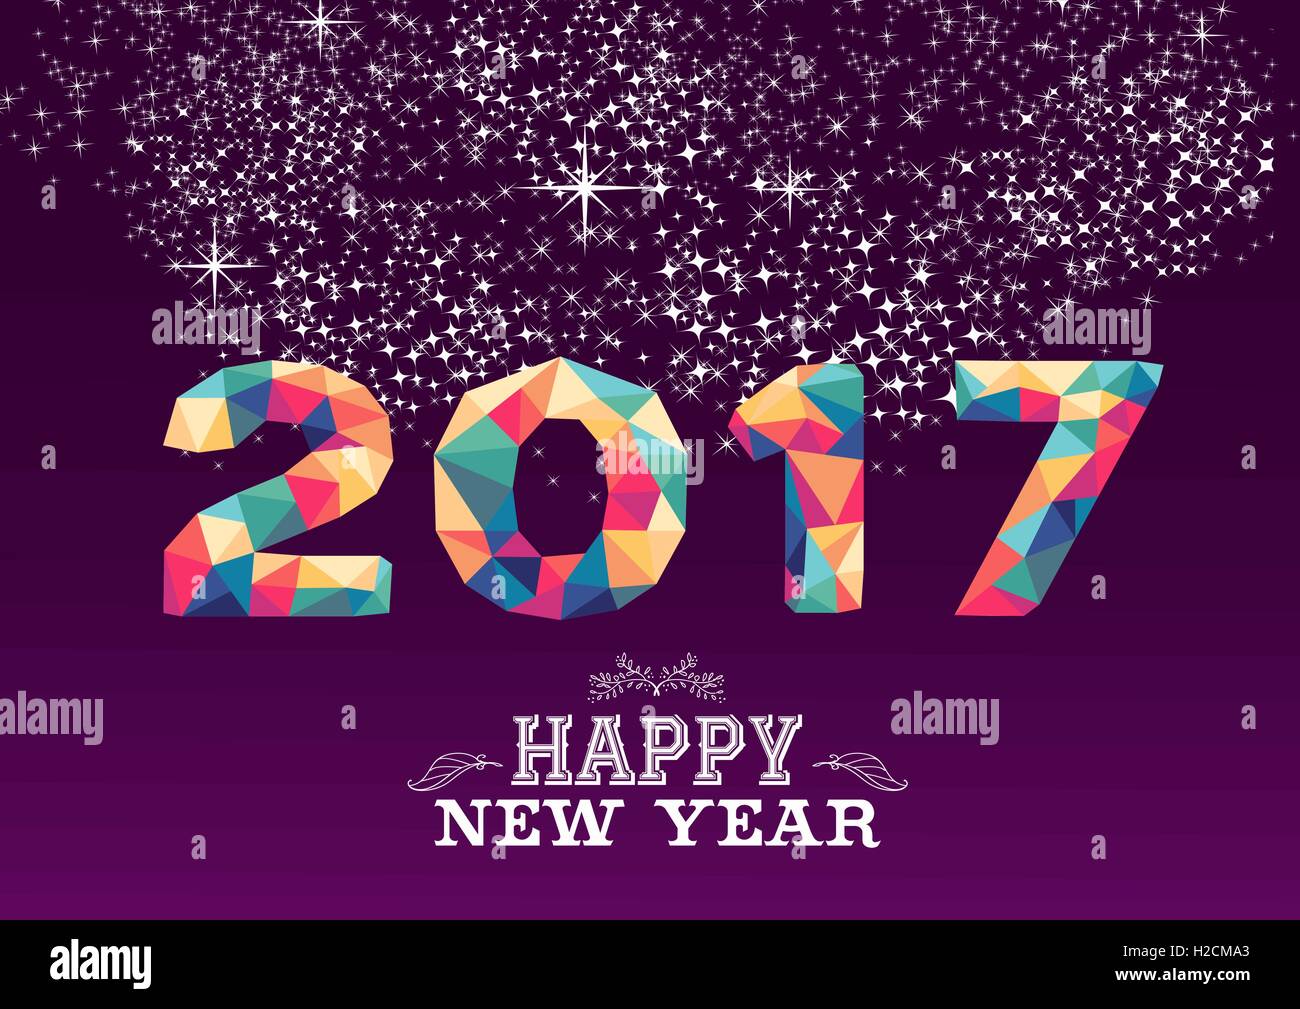 Happy new year 2017 low poly geometry design on night firework background. Ideal for greeting card, party invitation or web. Stock Vector